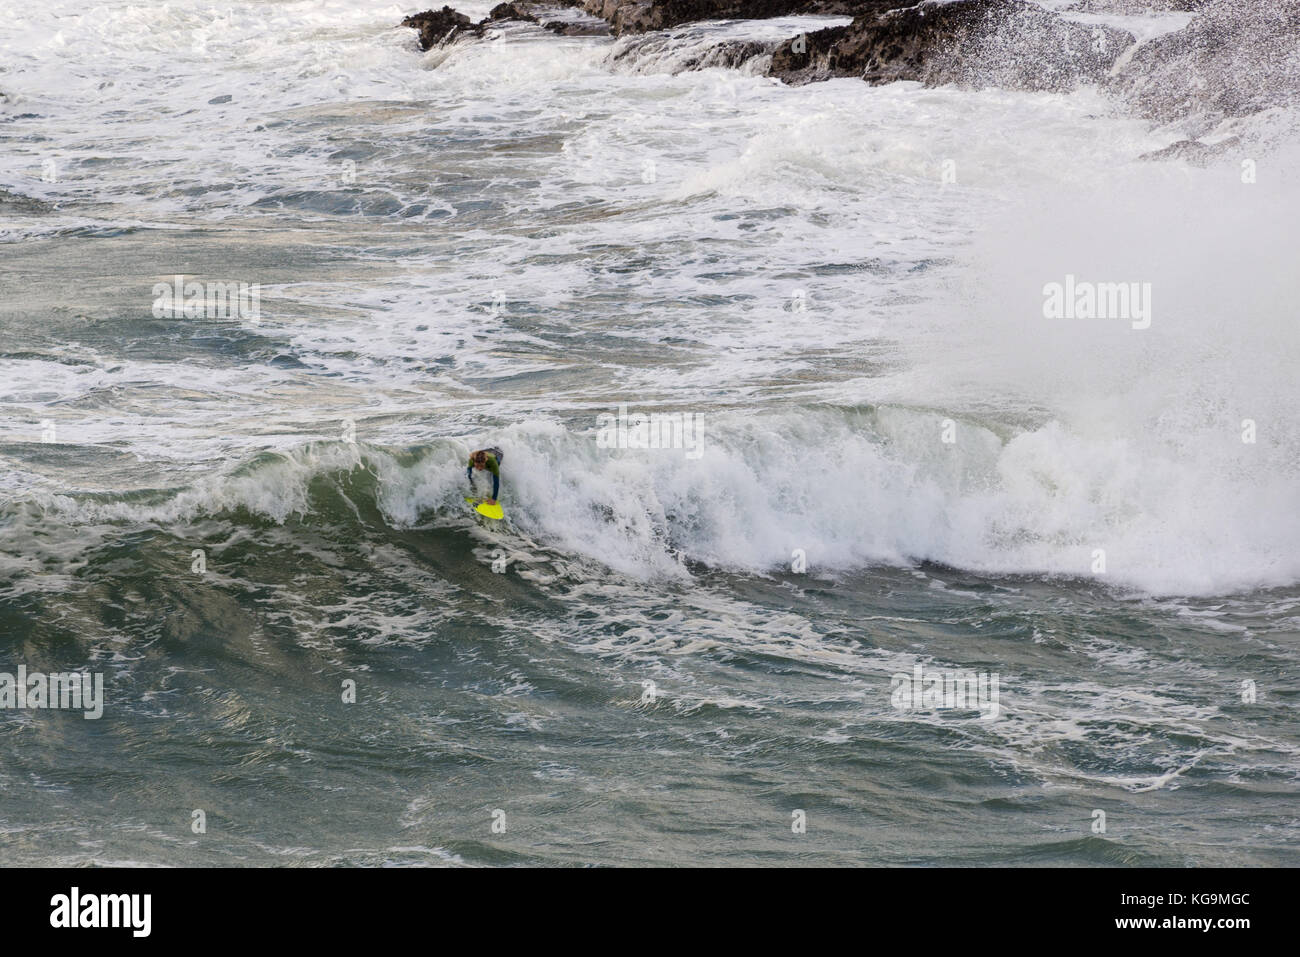 Young surfer riding a wave in rough sea, Port Gaverne, Port Isaac, Cornwall, UK, 5th November 2017. Stock Photo